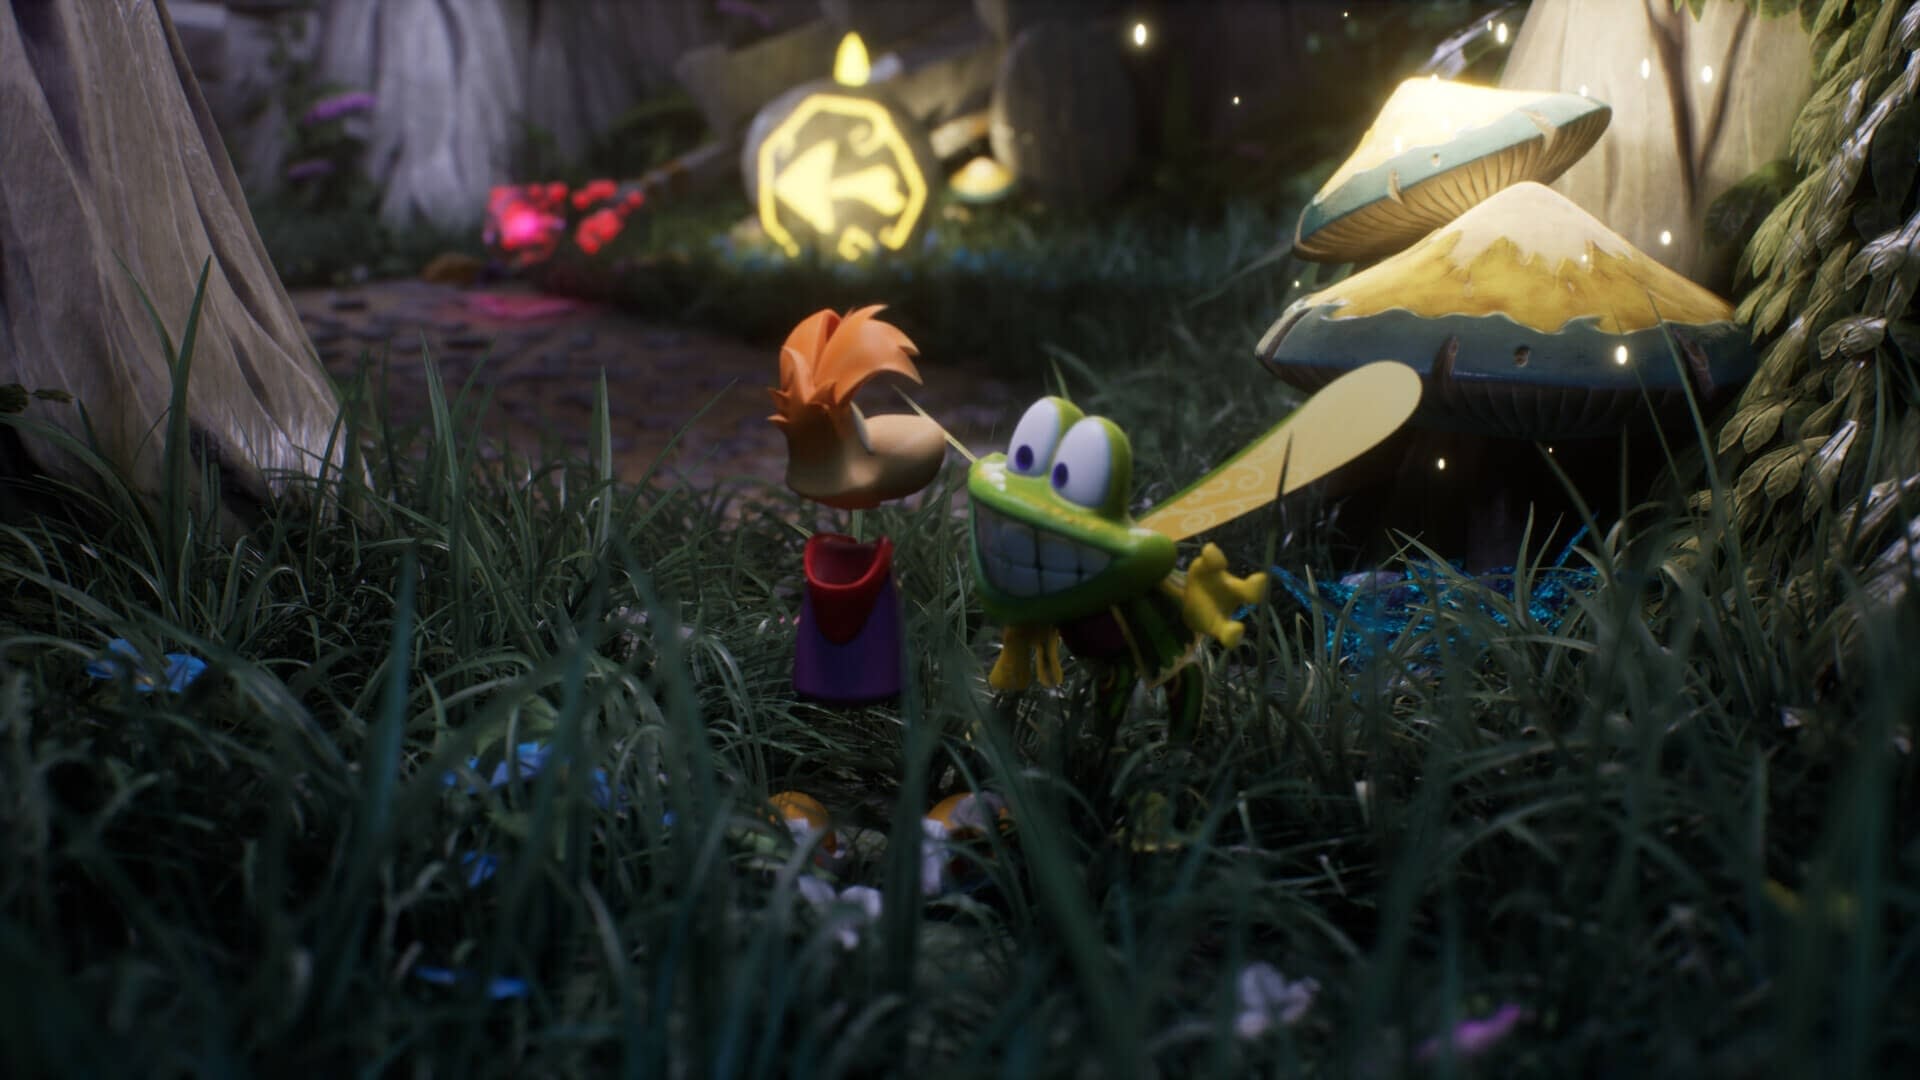 How to See Rayman 3 Unreal Engine 5?